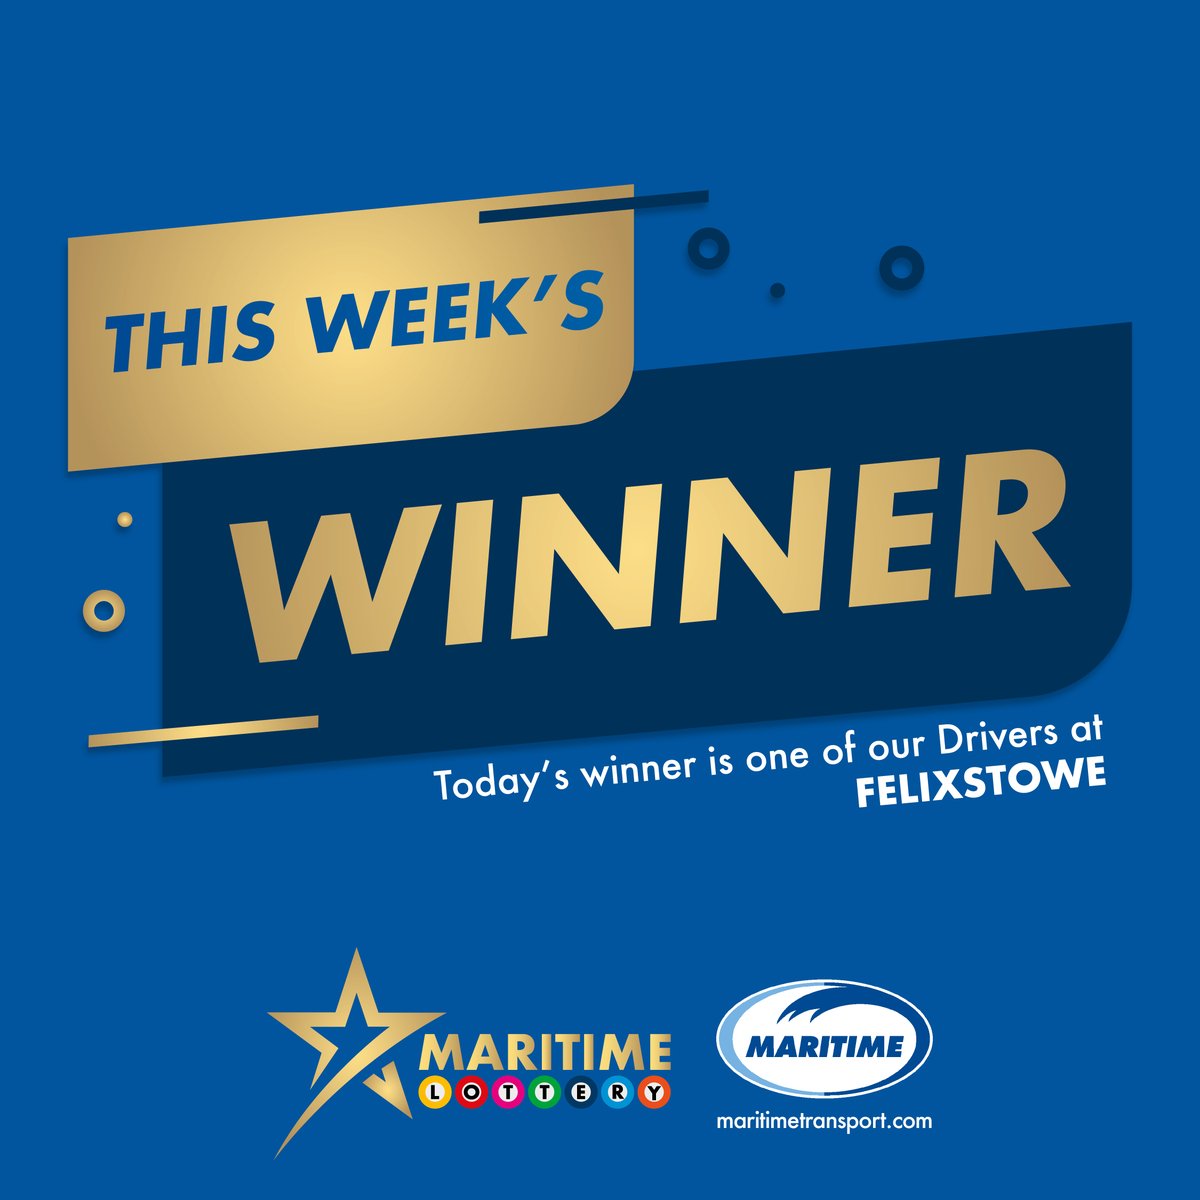 Congratulations to one of our Drivers, based at Felixstowe, who has just been announced as this week’s winner of our Maritime Lottery, taking home £1,000! Employees head to iWave to find out more. #mtllottery #maritimetransport